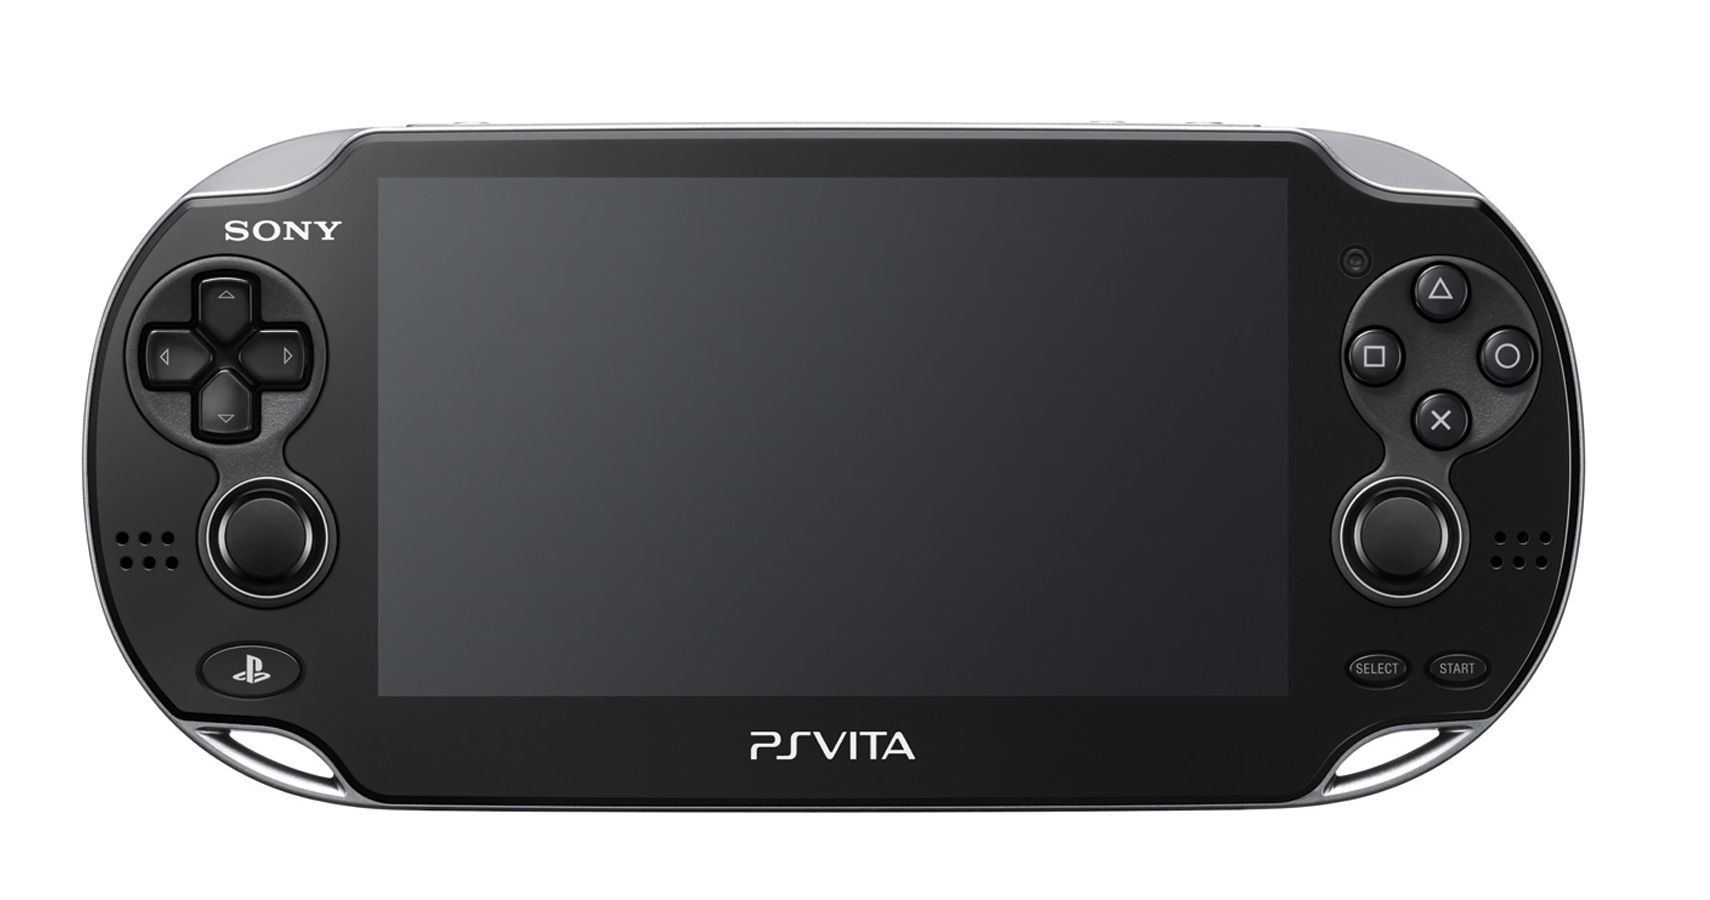 Playstation Spain Confirms The Vita Is Discontinued